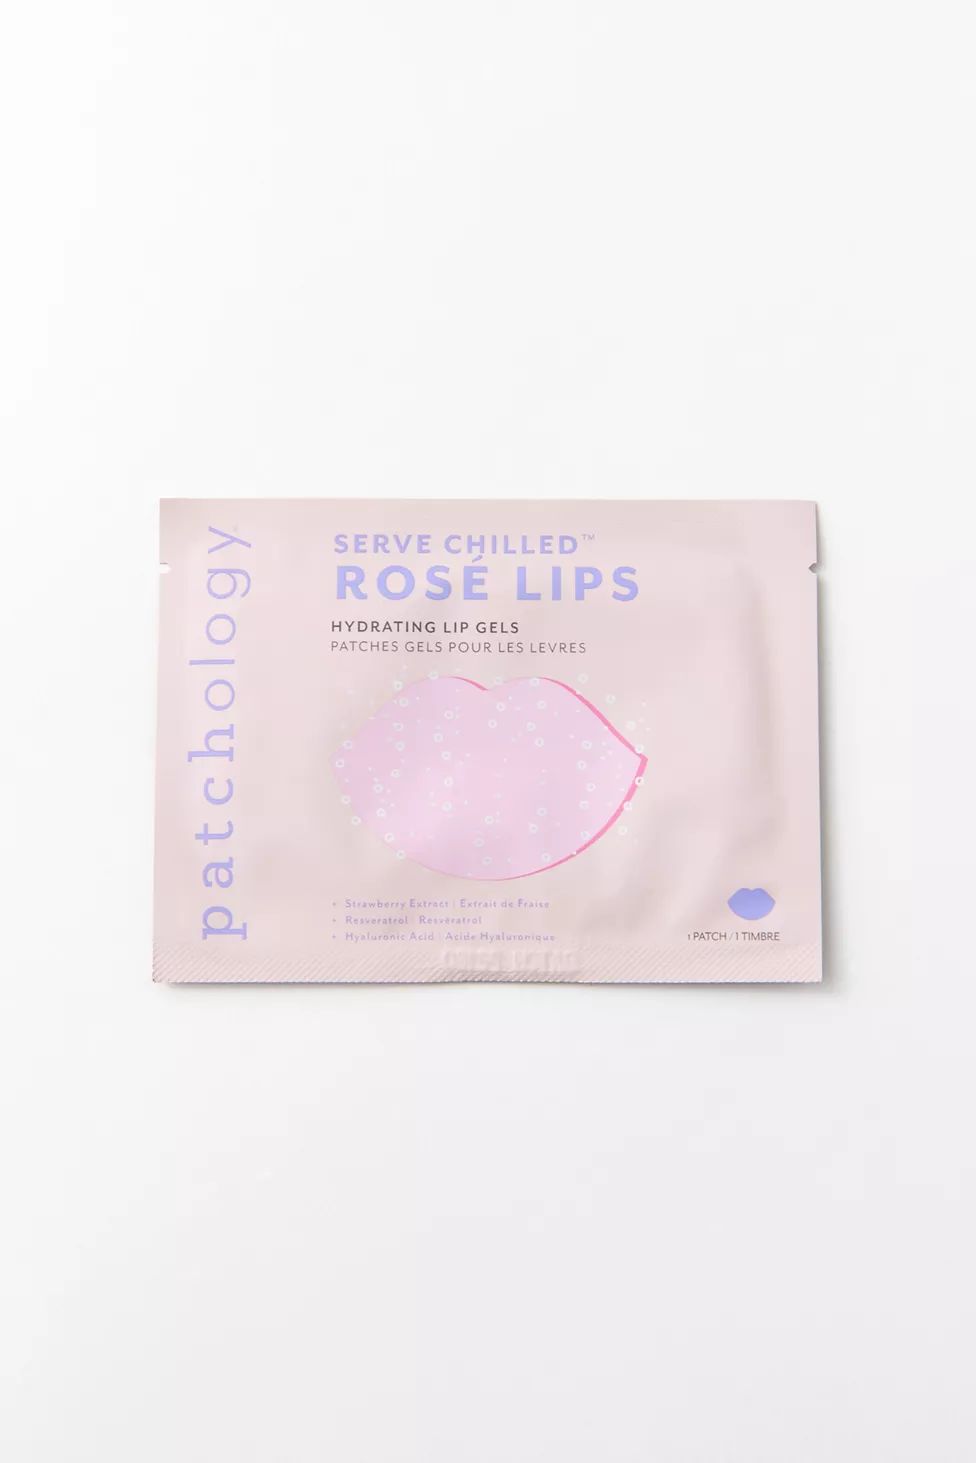 Patchology Serve Chilled Rose Lips Hydrating Lip Gels Mask | Urban Outfitters (US and RoW)